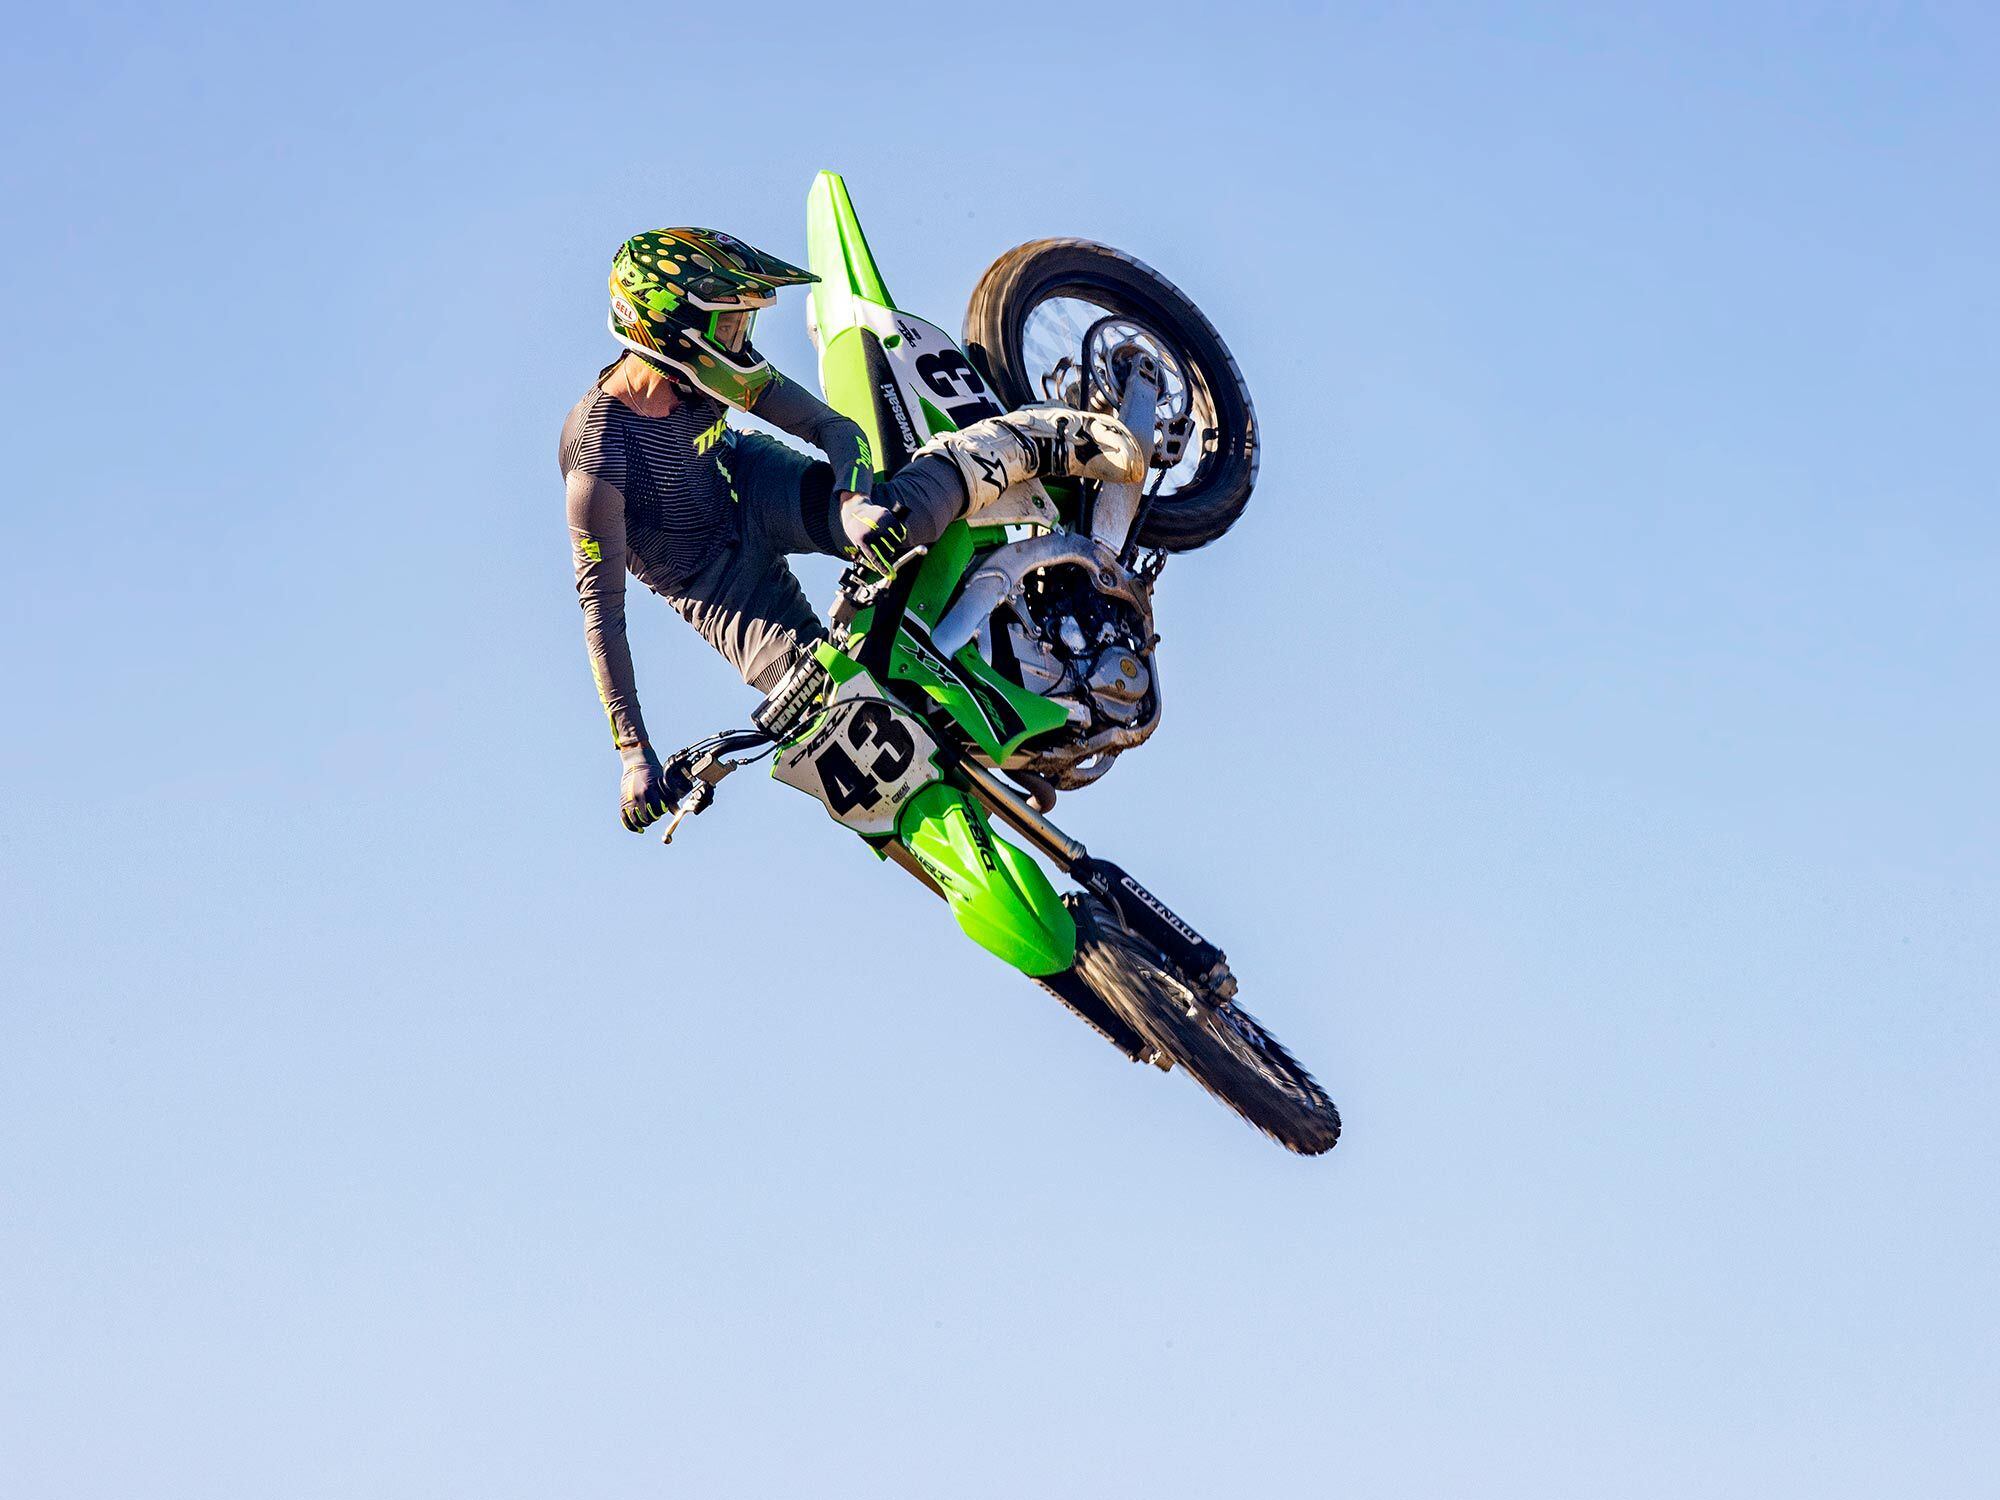 “The Kawasaki KX450 is just a solid package. Its flaws are relatively easy fixes, with an ARC front brake lever being at the top of the list. The 250mm rear rotor is a buzzkill seeing as the KX250 comes equipped with the tried-and-true 240mm size, but it isn’t a deal breaker.” <i>—Casey Casper</i>